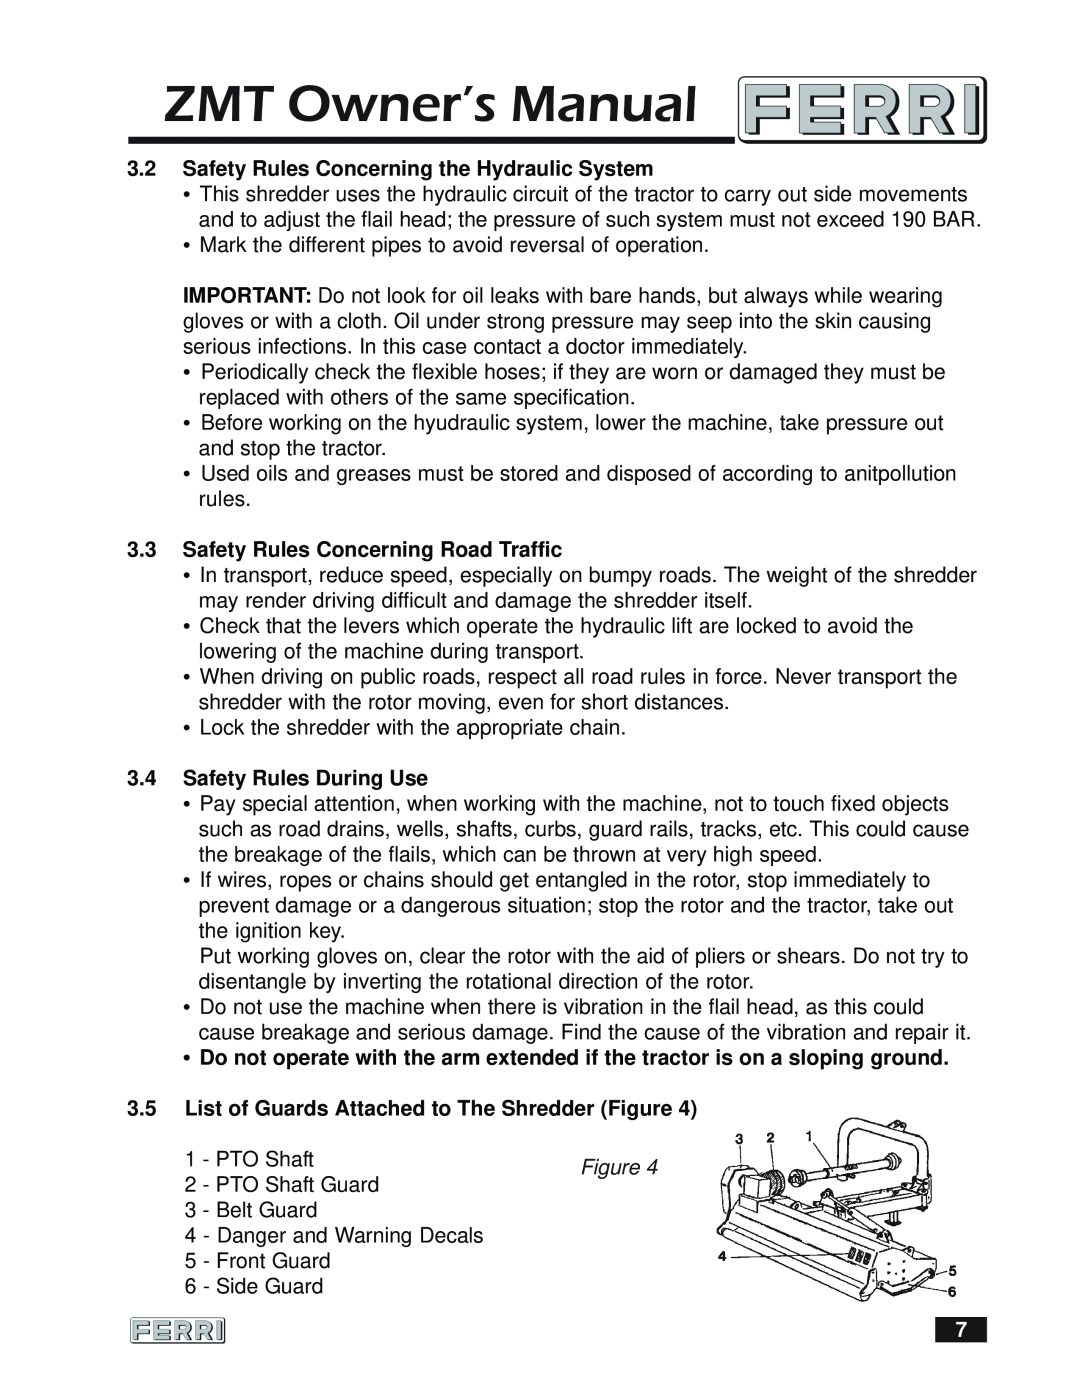 Ferris Industries 160 3.2Safety Rules Concerning the Hydraulic System, 3.3Safety Rules Concerning Road Traffic, Figure 